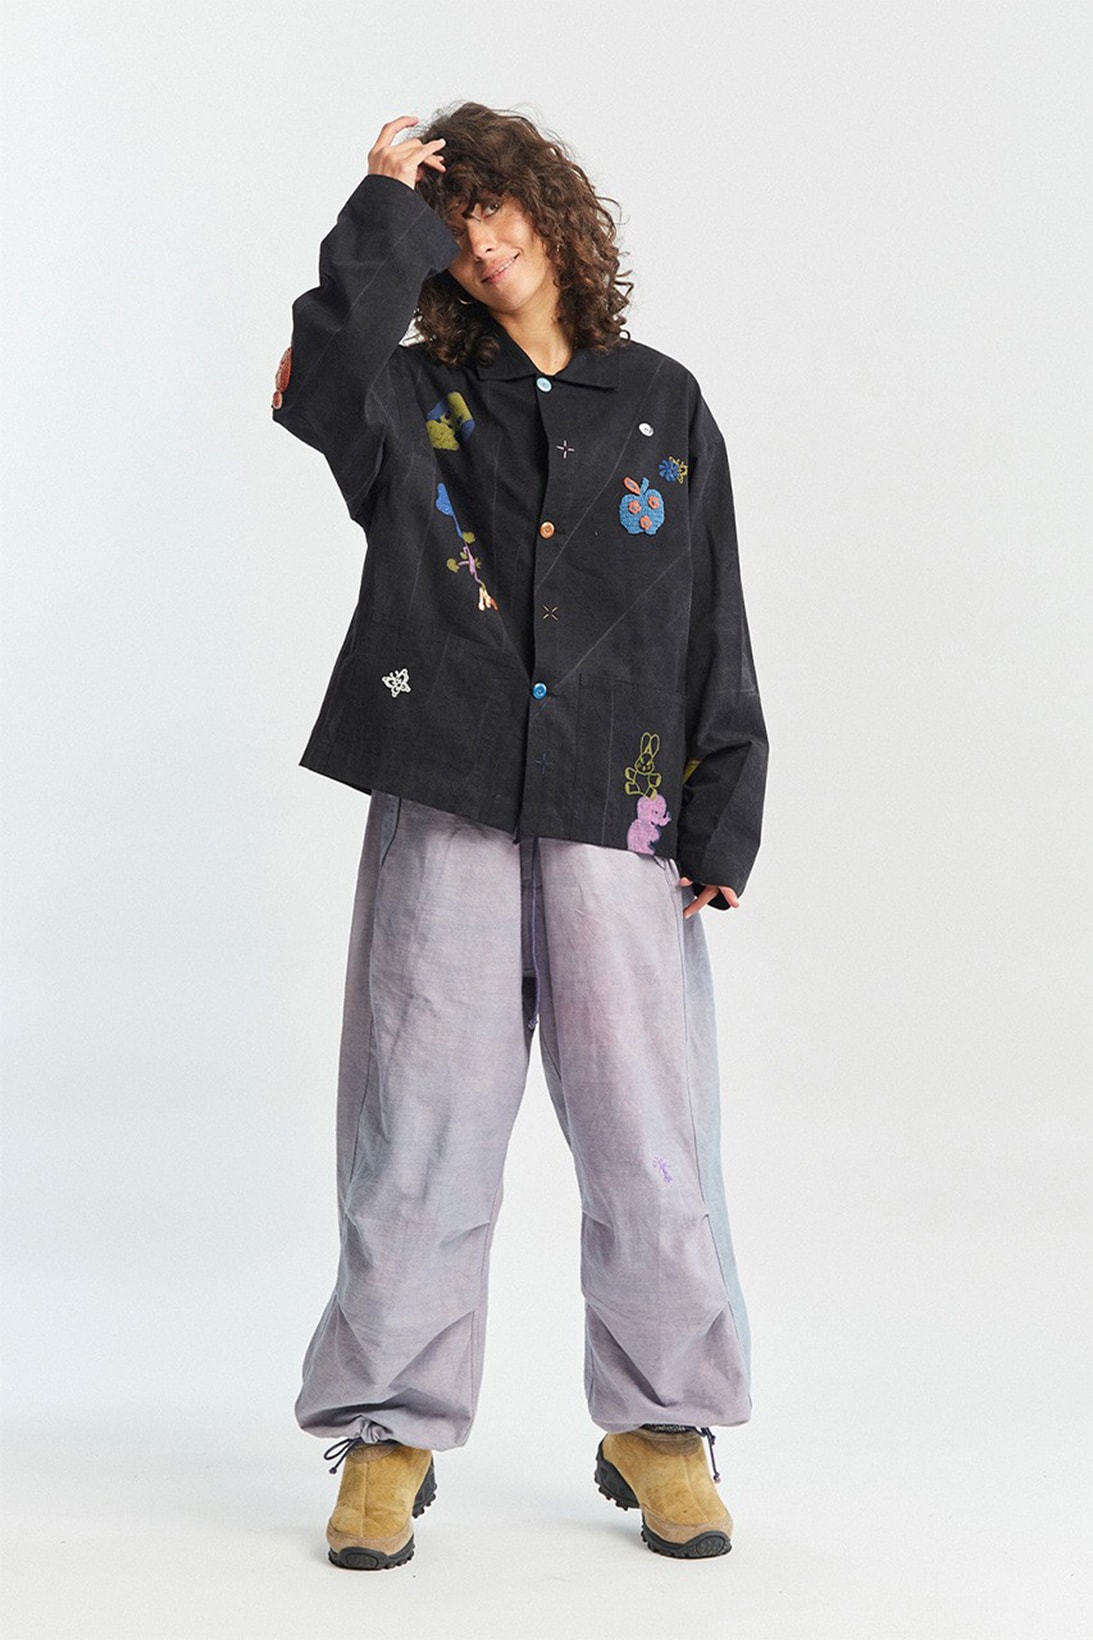 Story Mfg. Try Try Try Fall Winter Collection Lookbook Celestial Bodies Black Shirt Pants